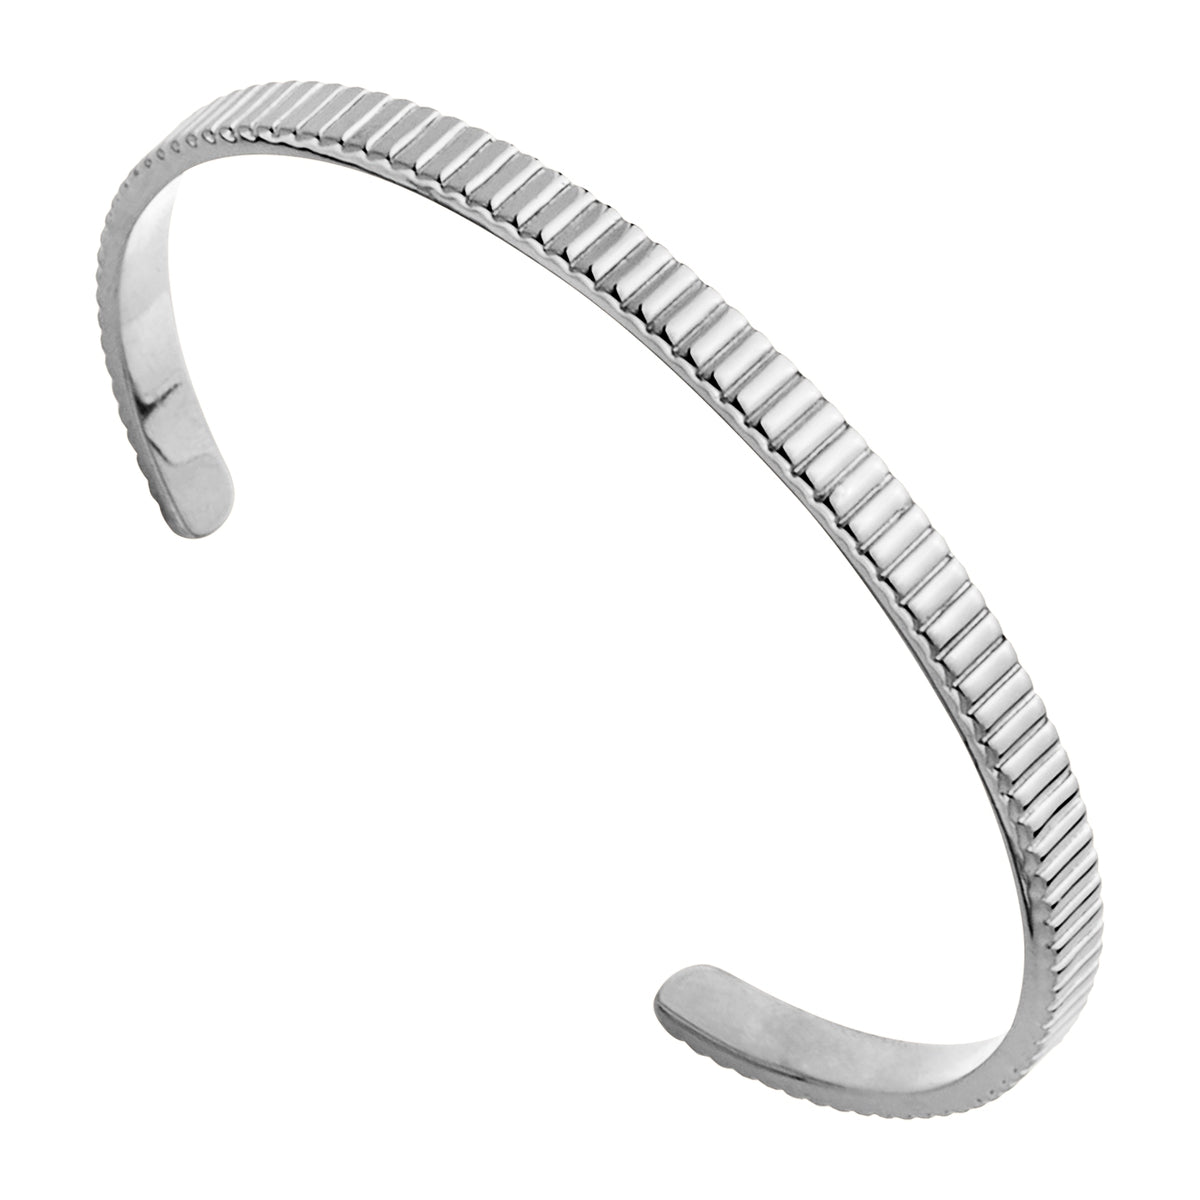 5mm Wide Solid Silver Ridged Pattern Cuff With Rounded Ends, 60mm